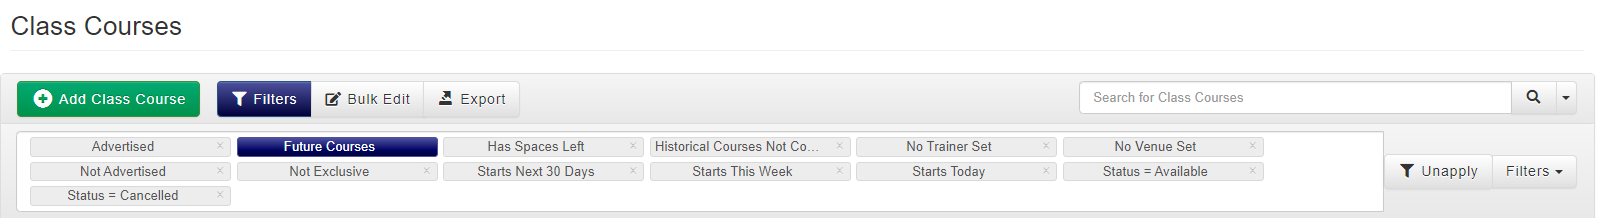 Class Courses filters